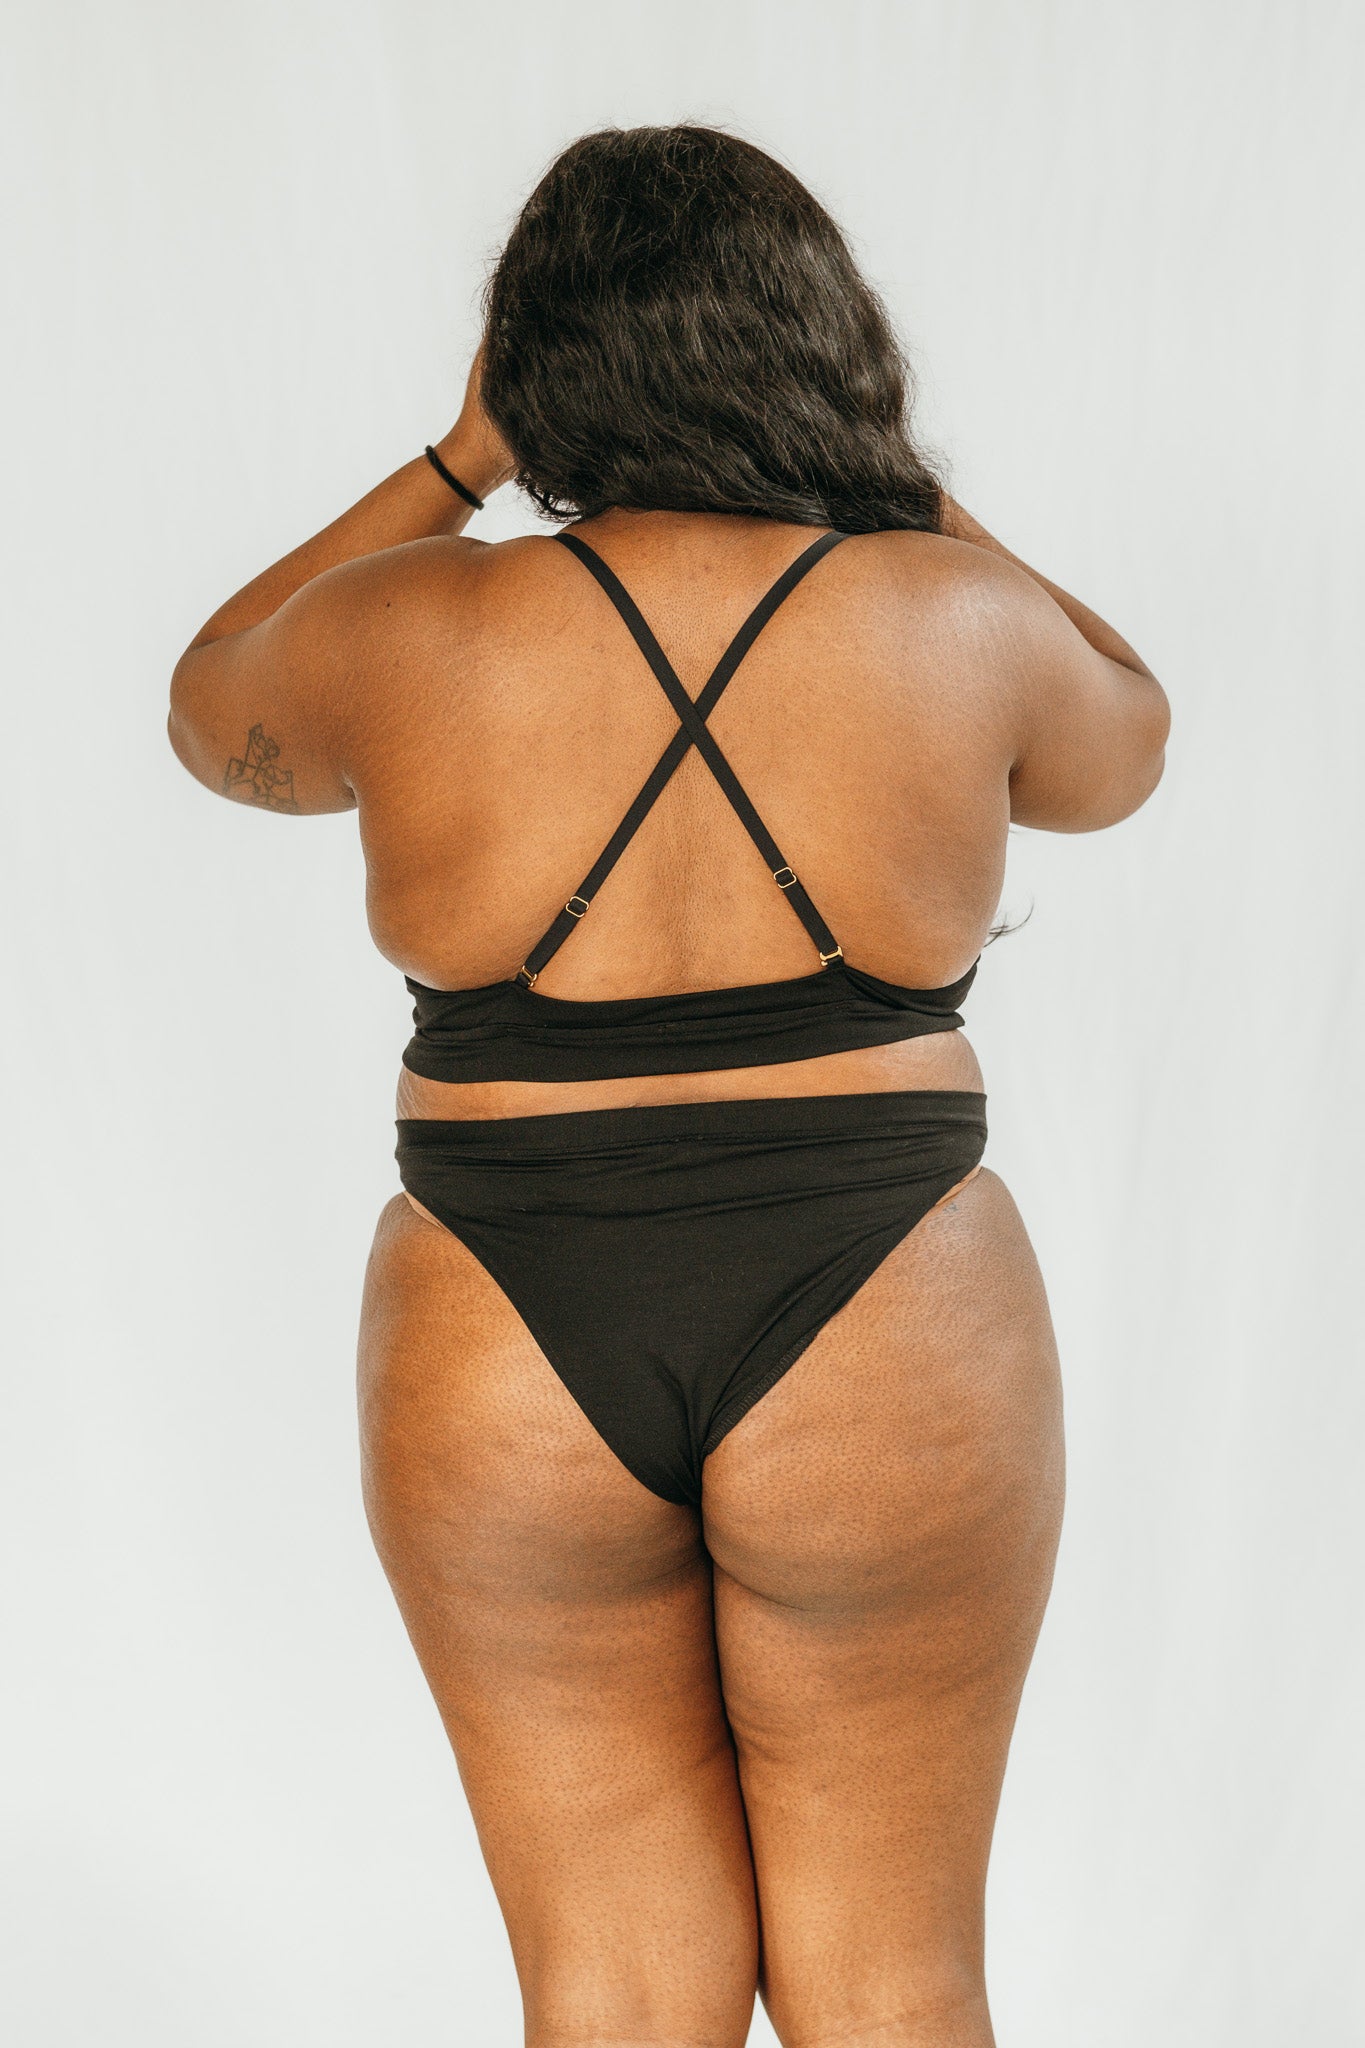 Person wears bra with crossed straps and high waist slip in black.